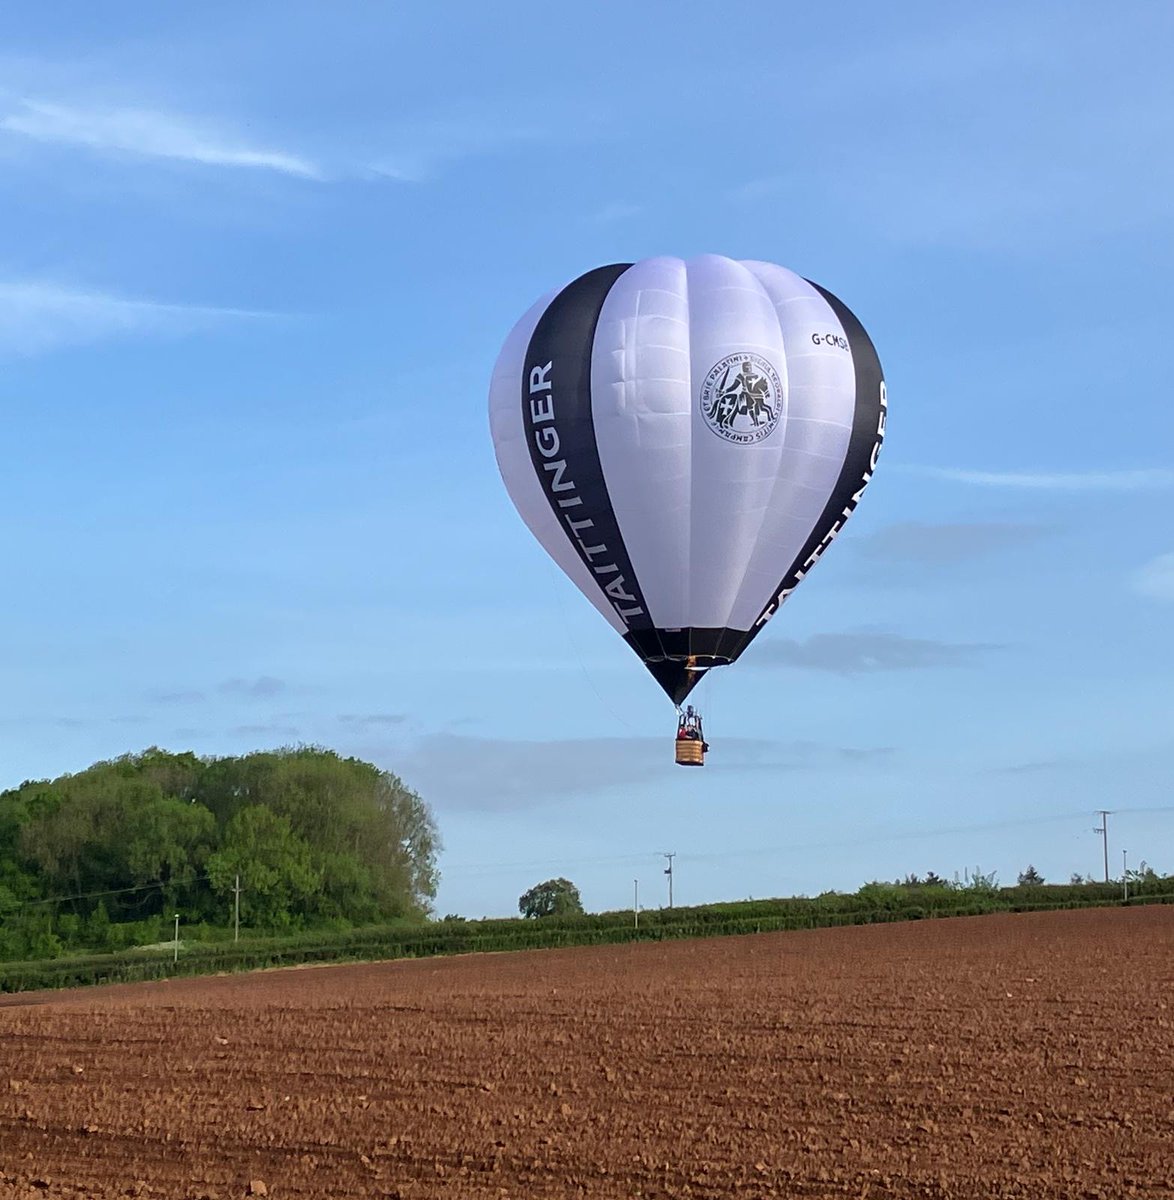 We were very excited to launch the brand new Champagne Taittinger hot air balloon this morning. Beautiful skies and stunning views, here’s to another 10 years of glorious flights! #ChampagneTaittinger #WhatsHatching